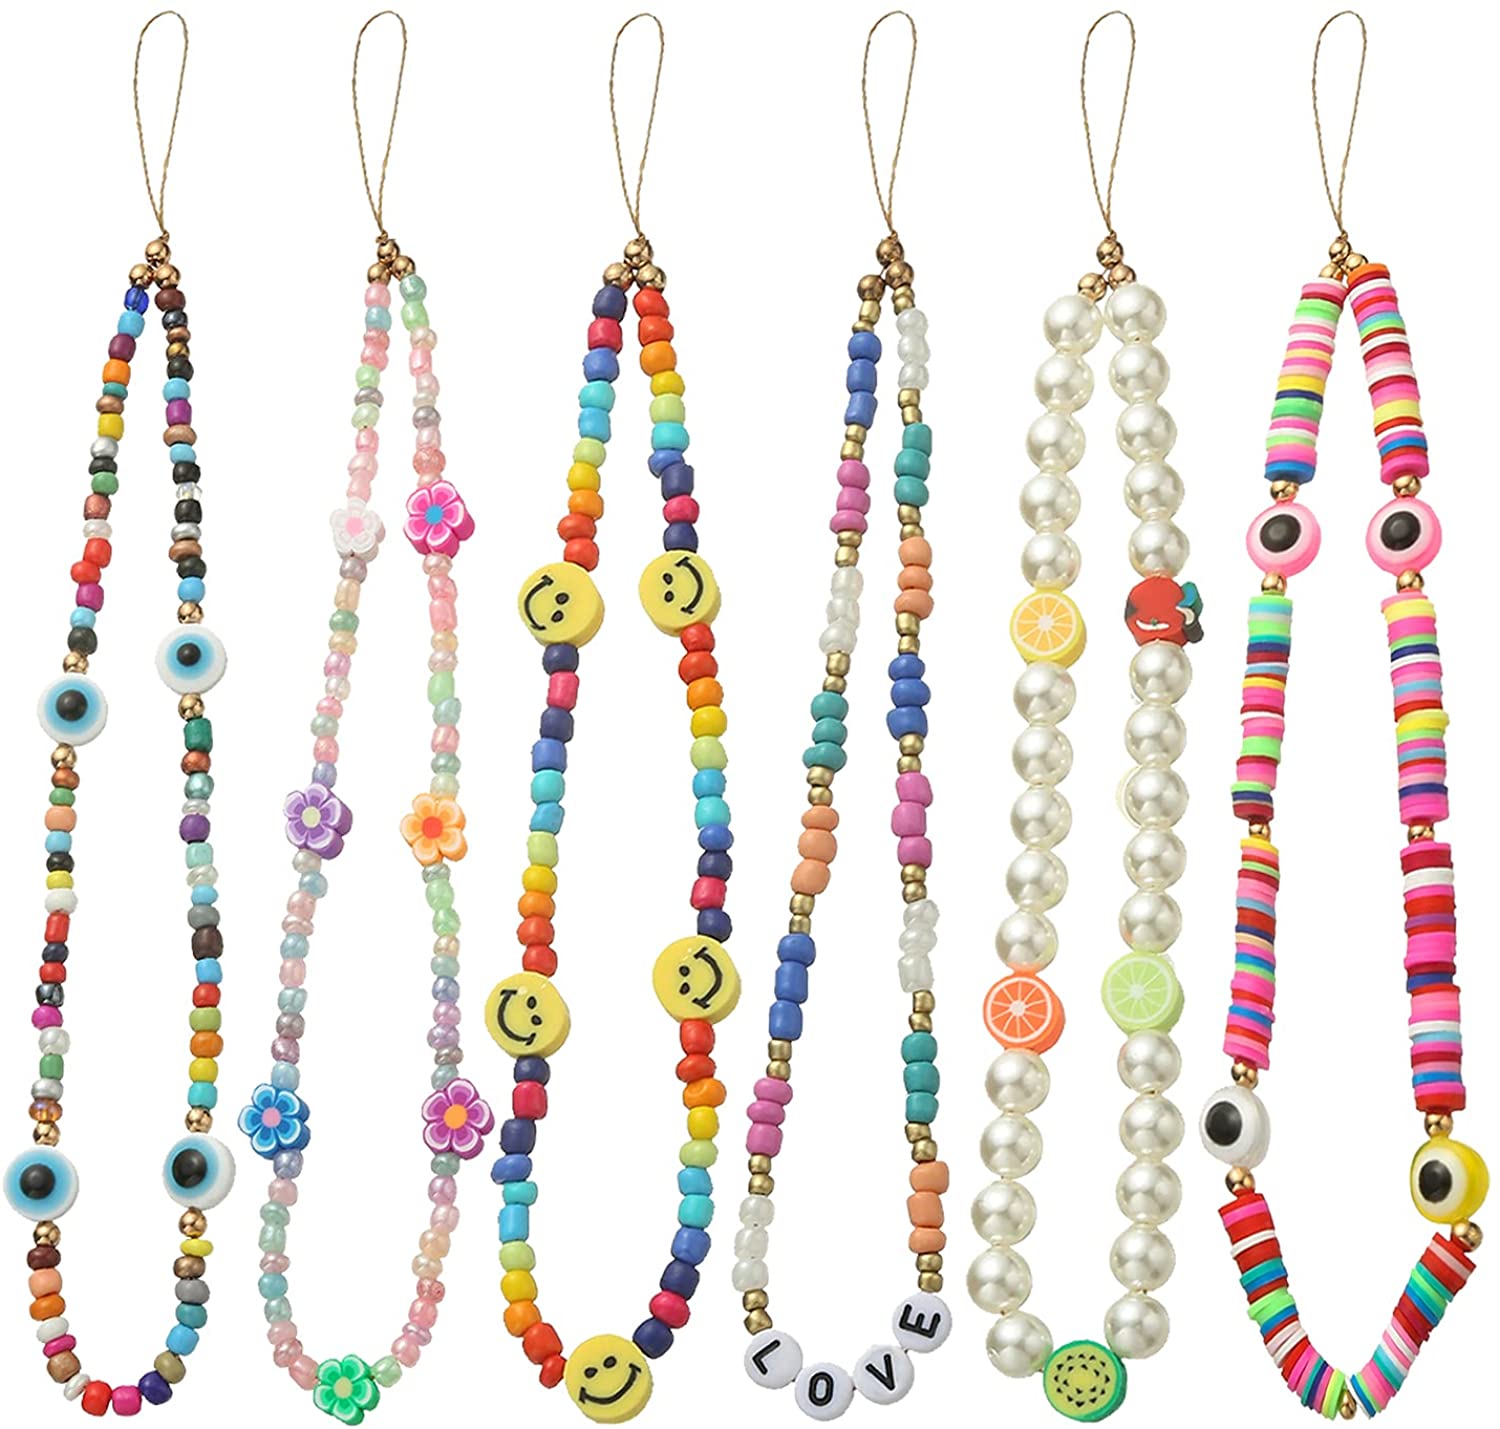 6PCS Beaded Phone Lanyard Wrist Strap Face Beaded Phone Charm Fruit Star Pearl Rainbow Color Beaded Phone Chain Strap for Women Girls